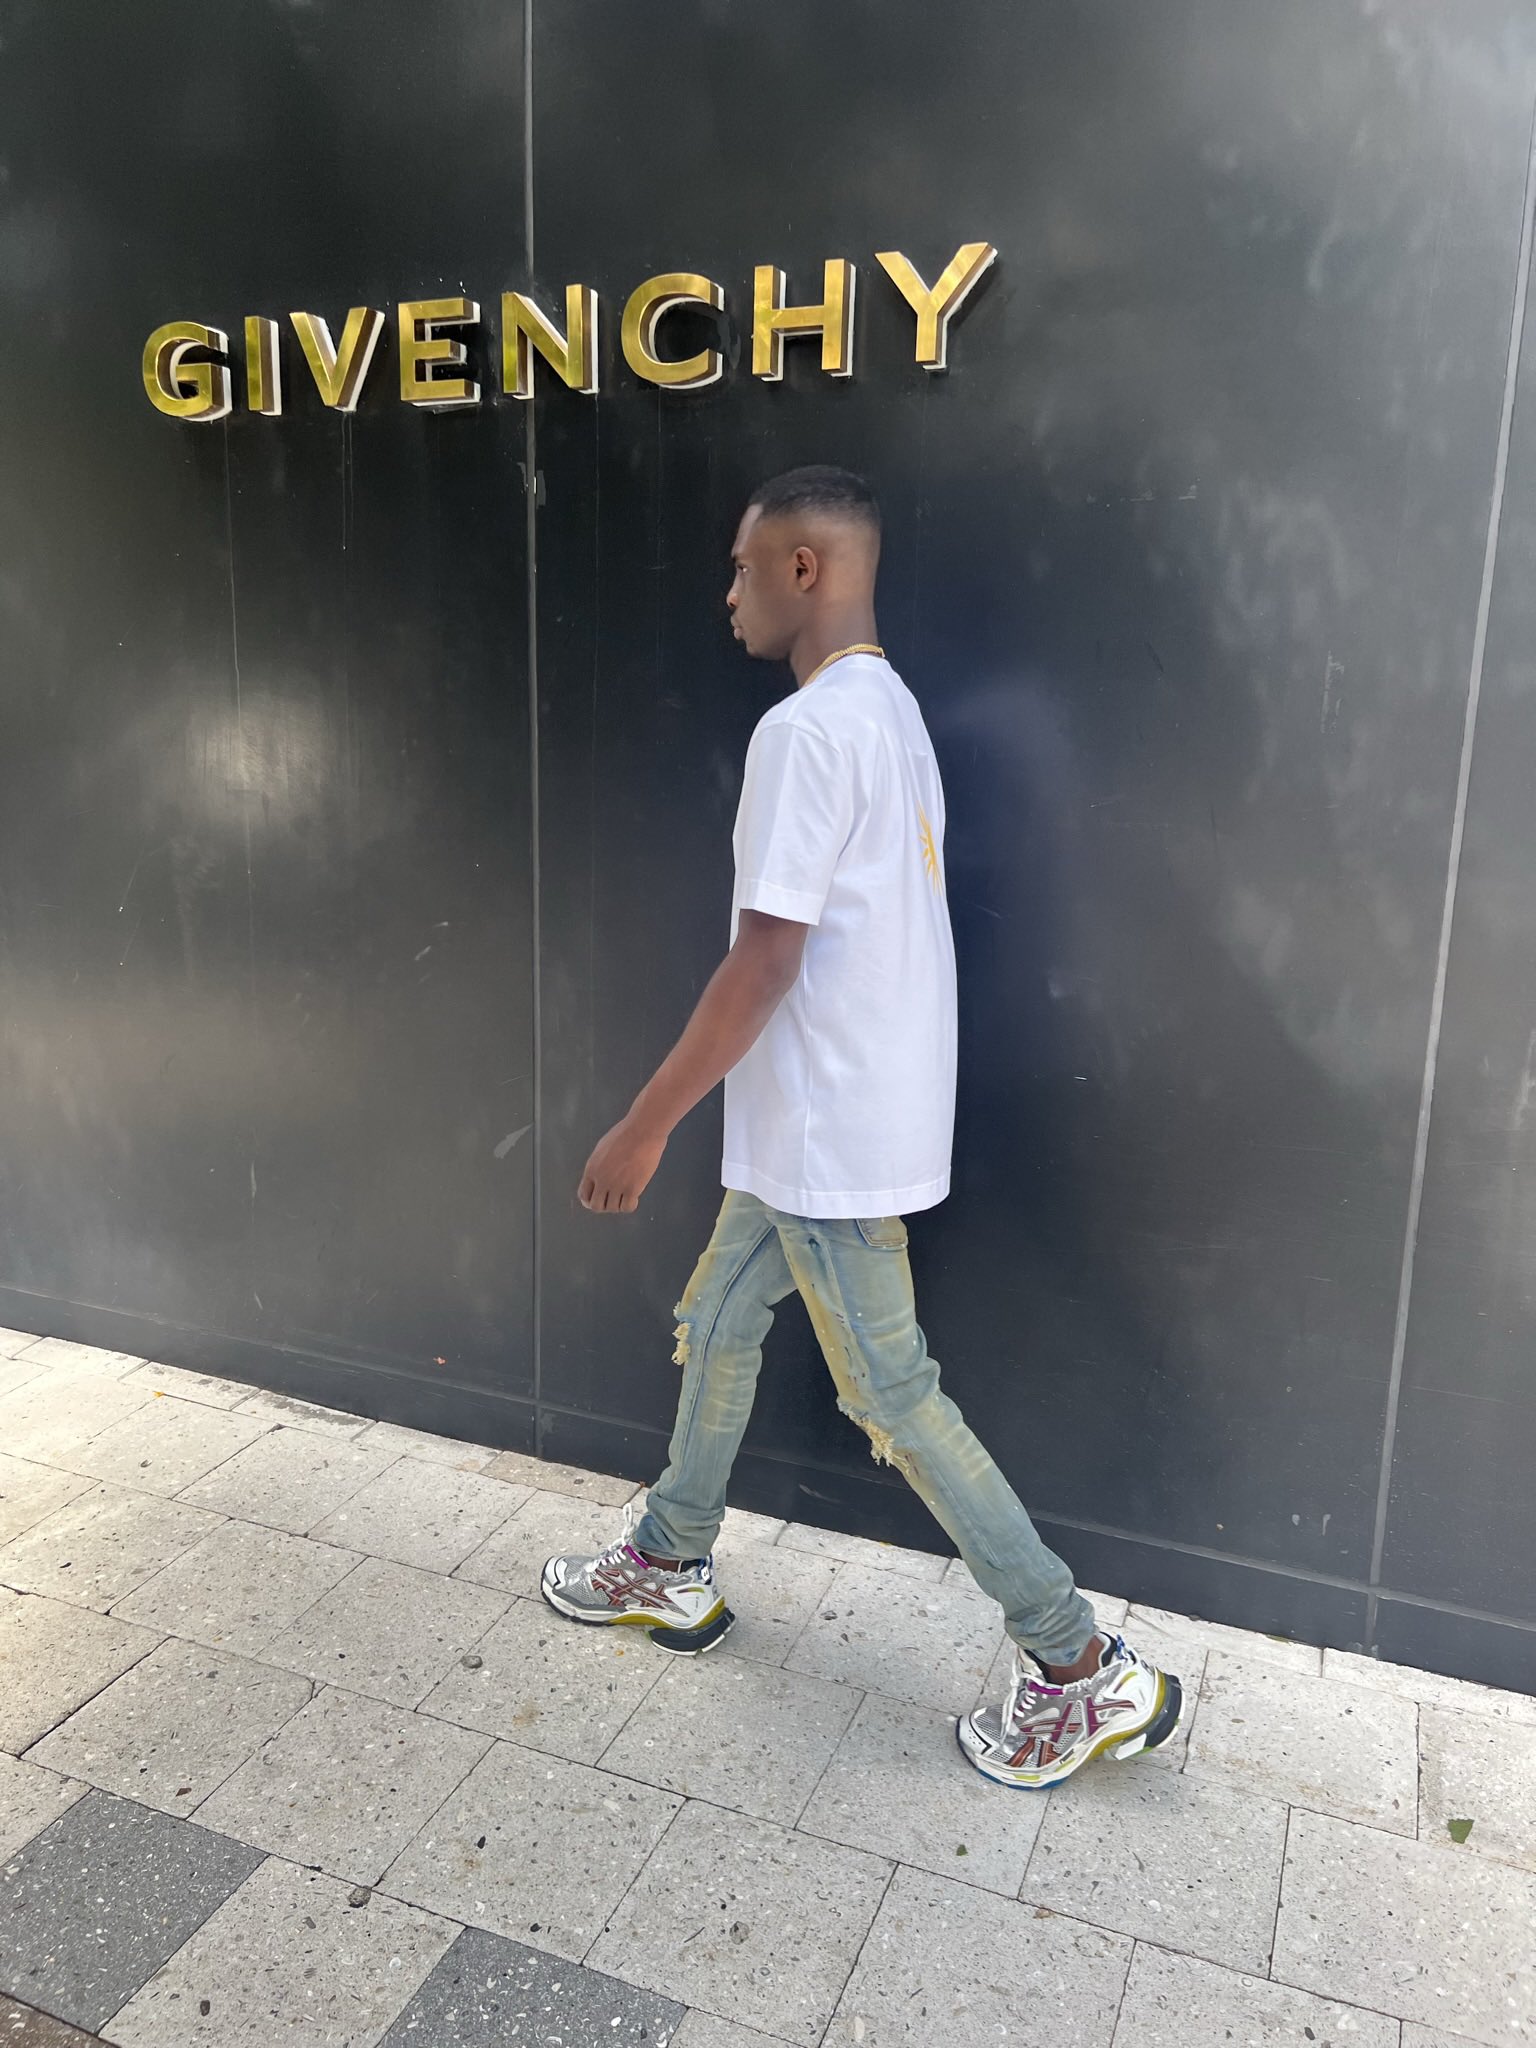 Givenchy - Twitter Search / Twitter